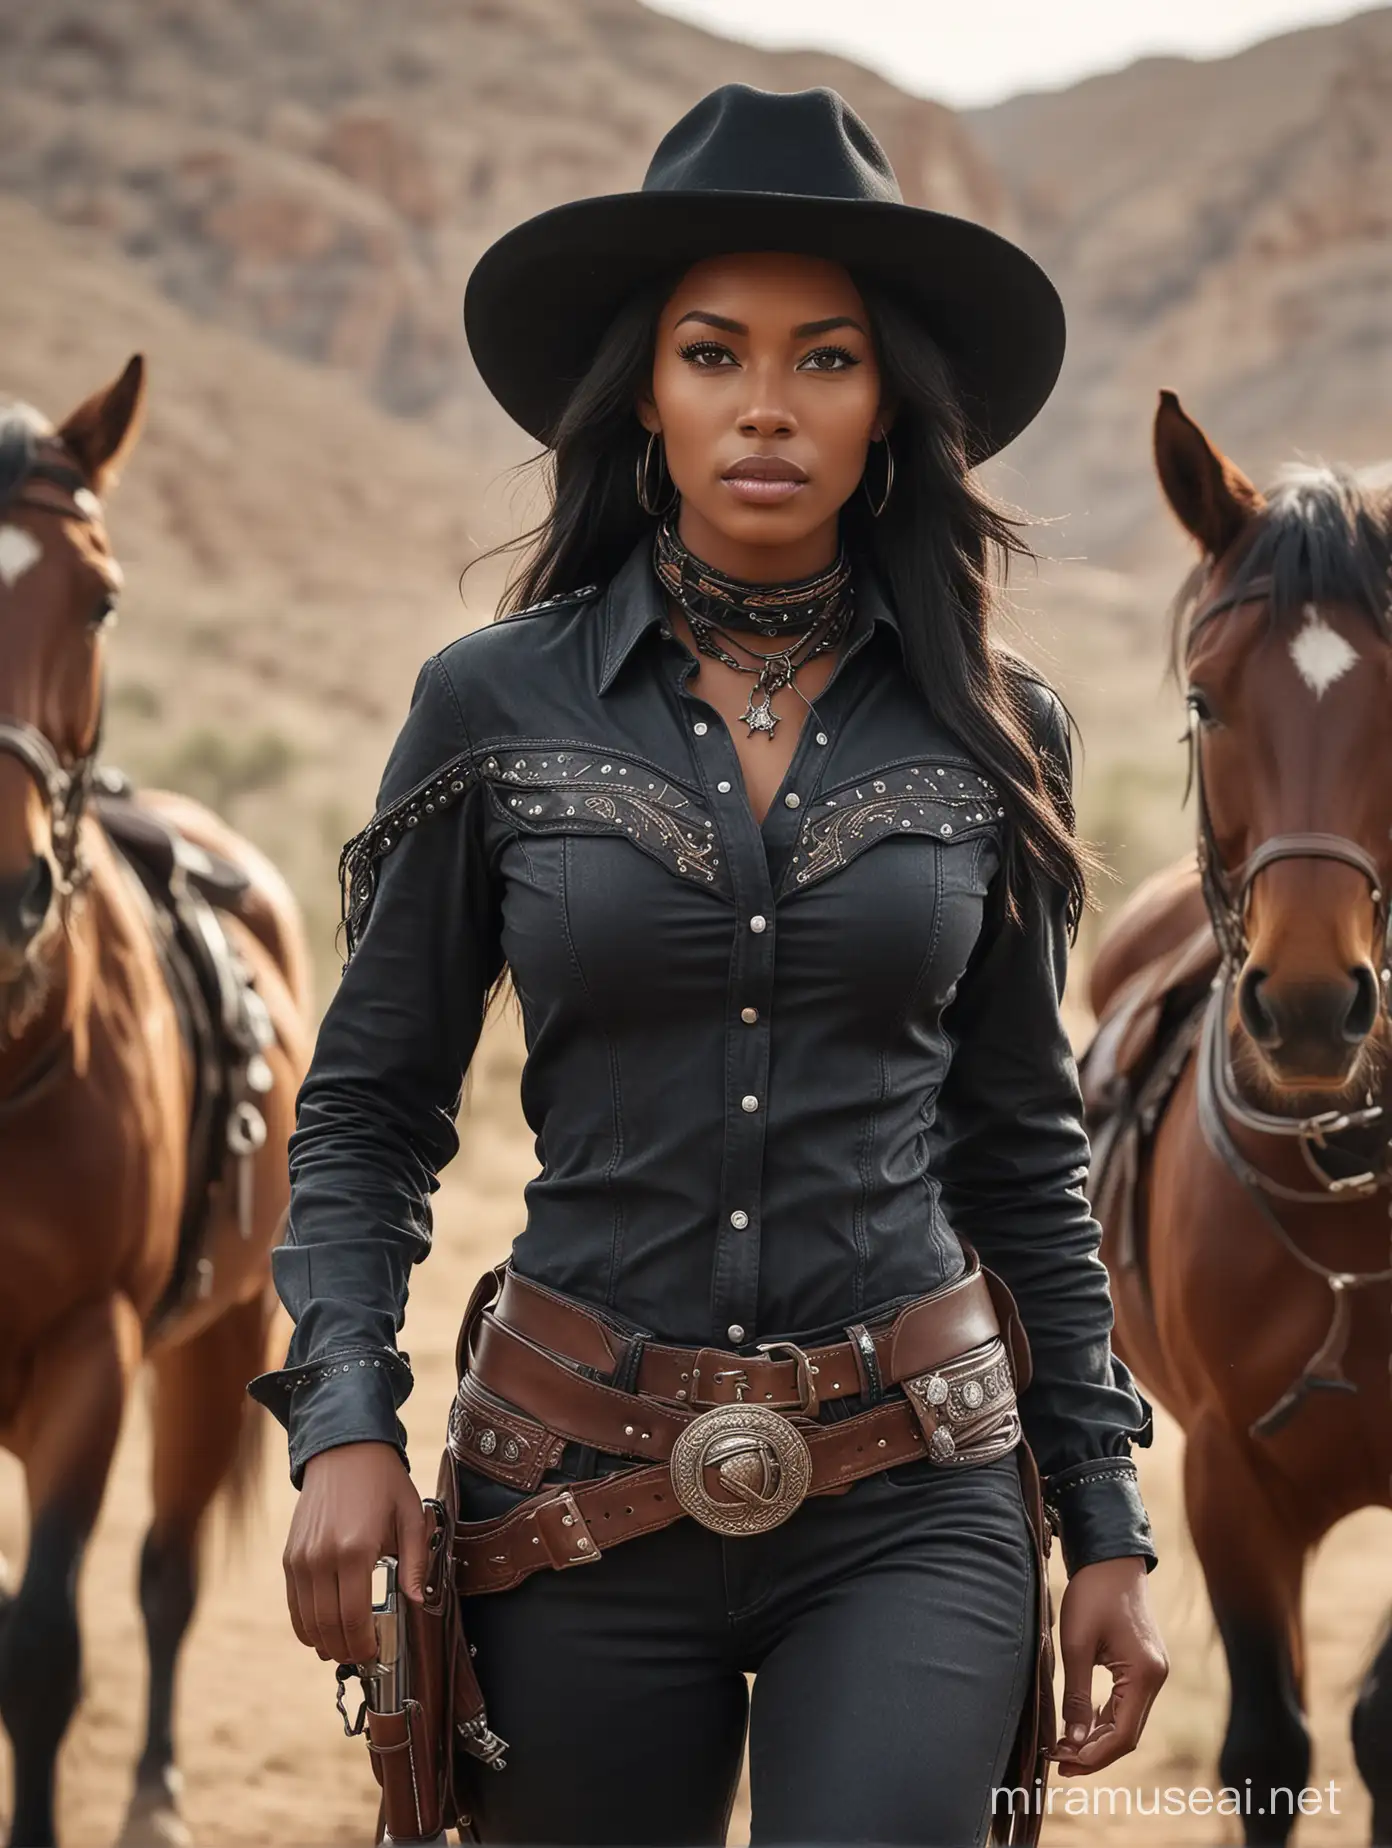 Black Cowgirl Leading Horses Stunning Cowboy Portrait in Wild West Setting